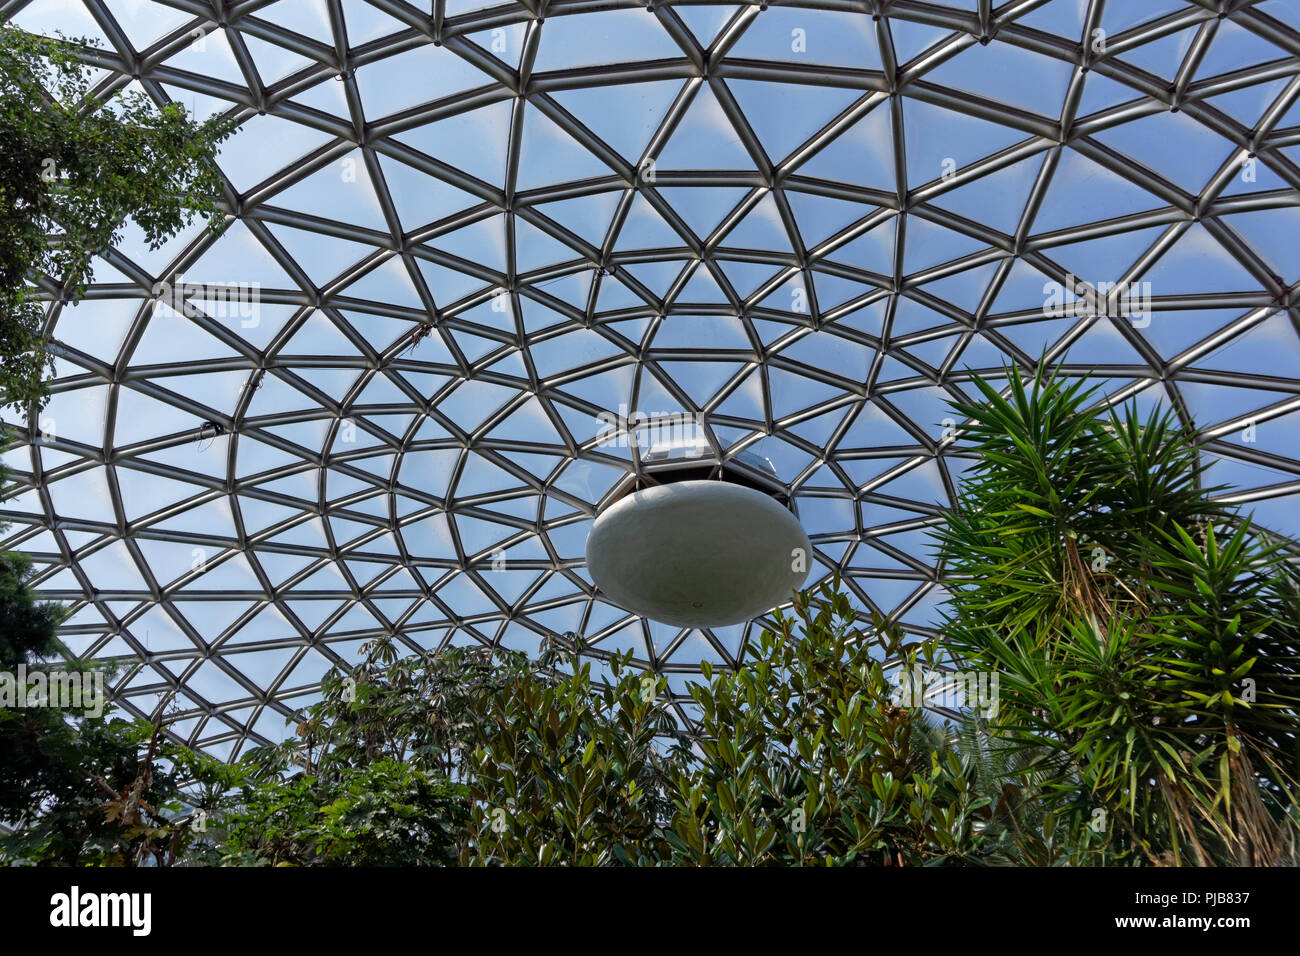 Tropical plants and Triodetic dome of the Bloedel Conservatory in Queen Elizabeth Park, Vancouver, BC, Canada Stock Photo